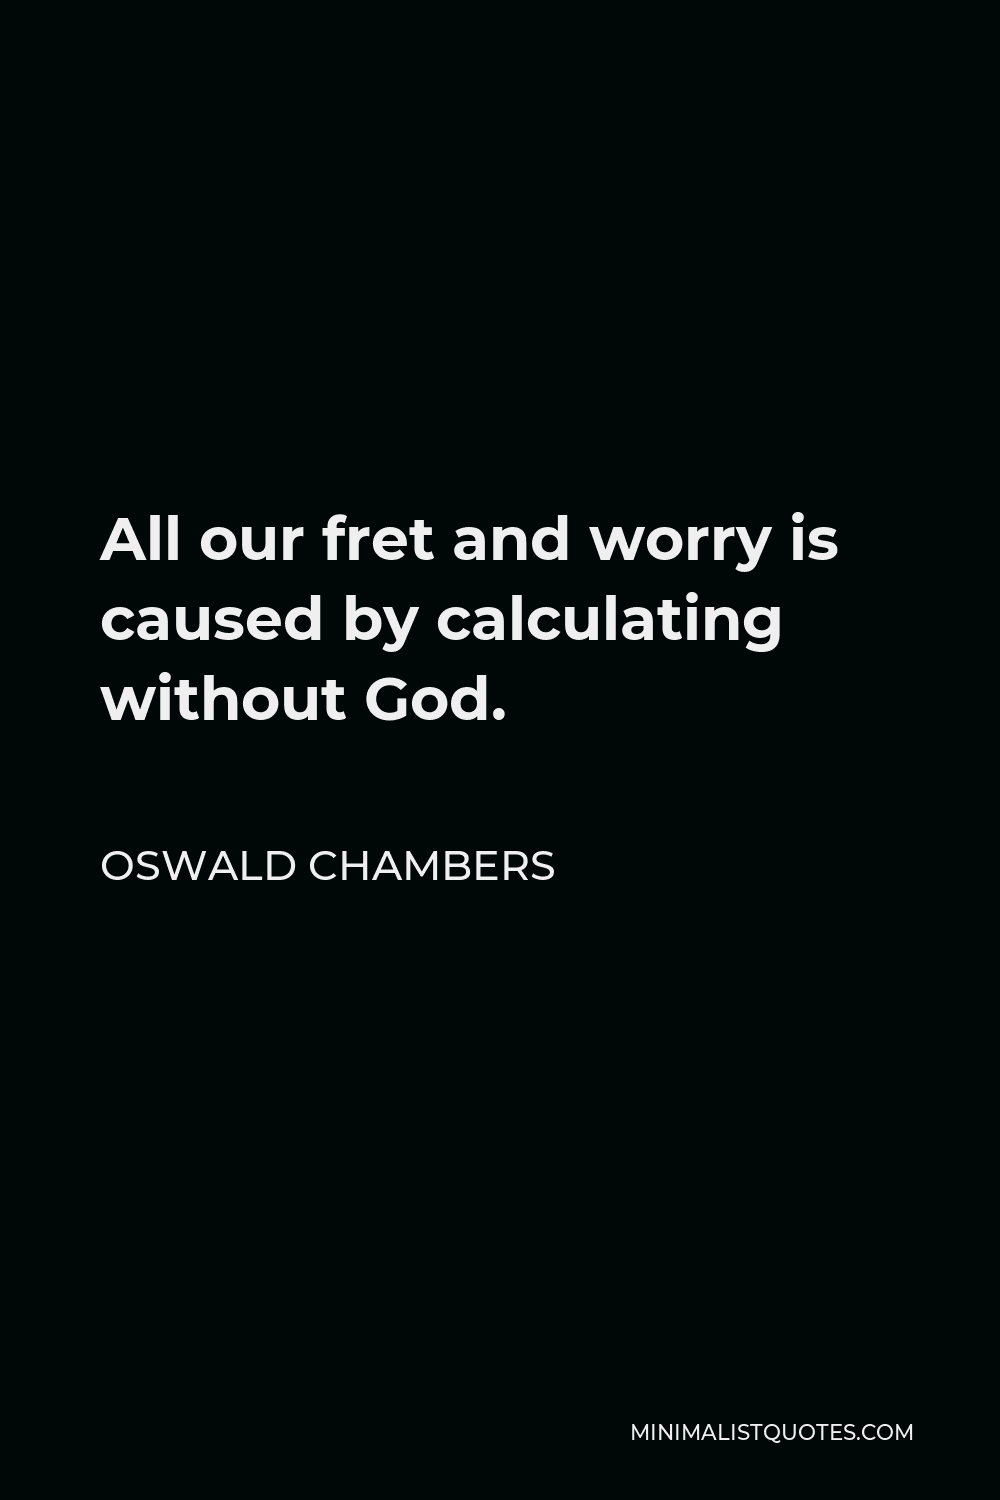 Oswald Chambers Quote - All our fret and worry is caused by calculating without God.